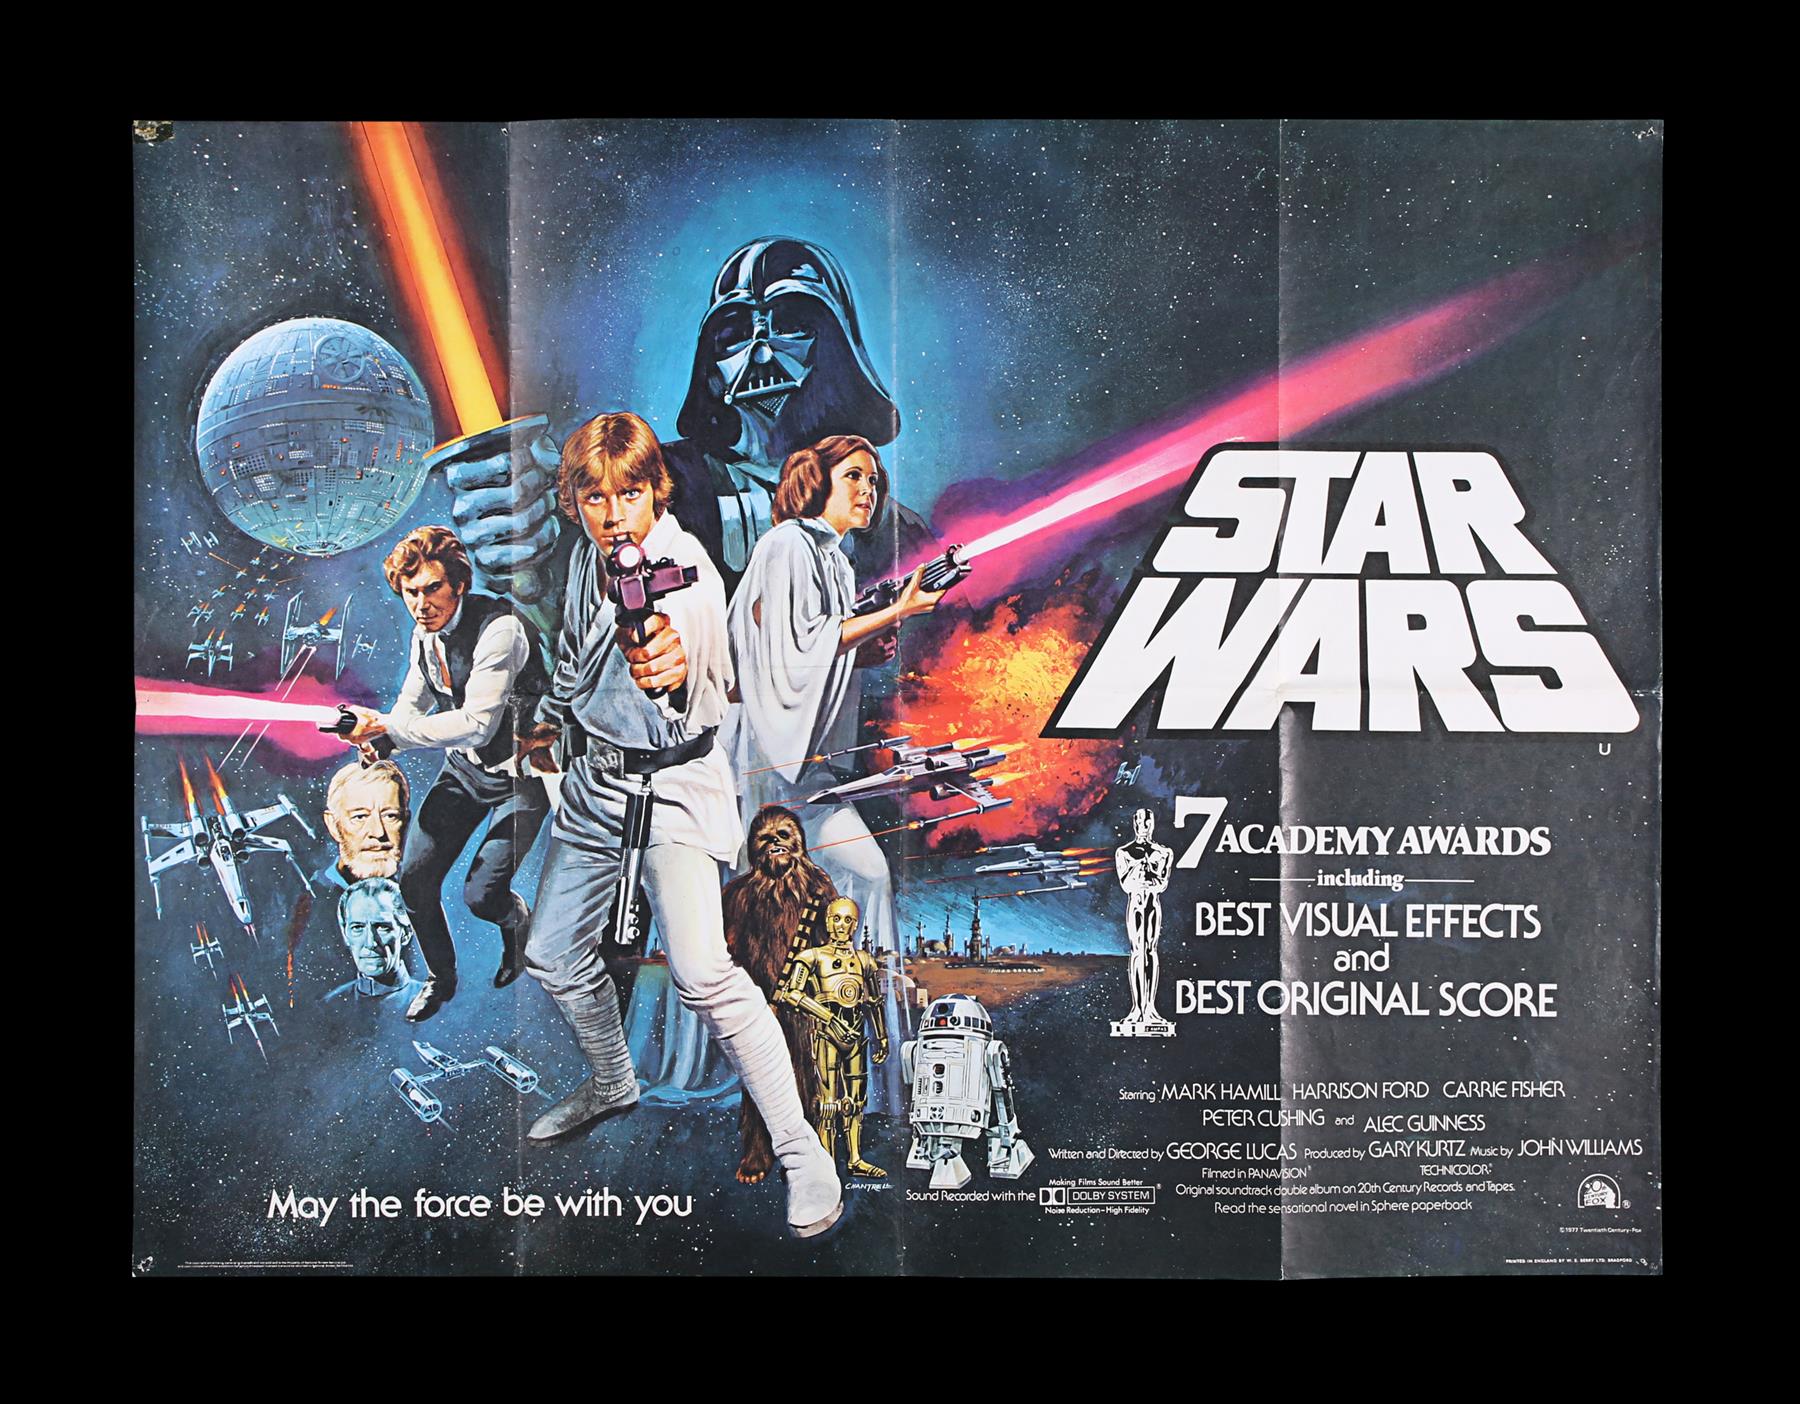 STAR WARS: A NEW HOPE (1977) - UK Quad Poster "Style C" Awards Style, 1977